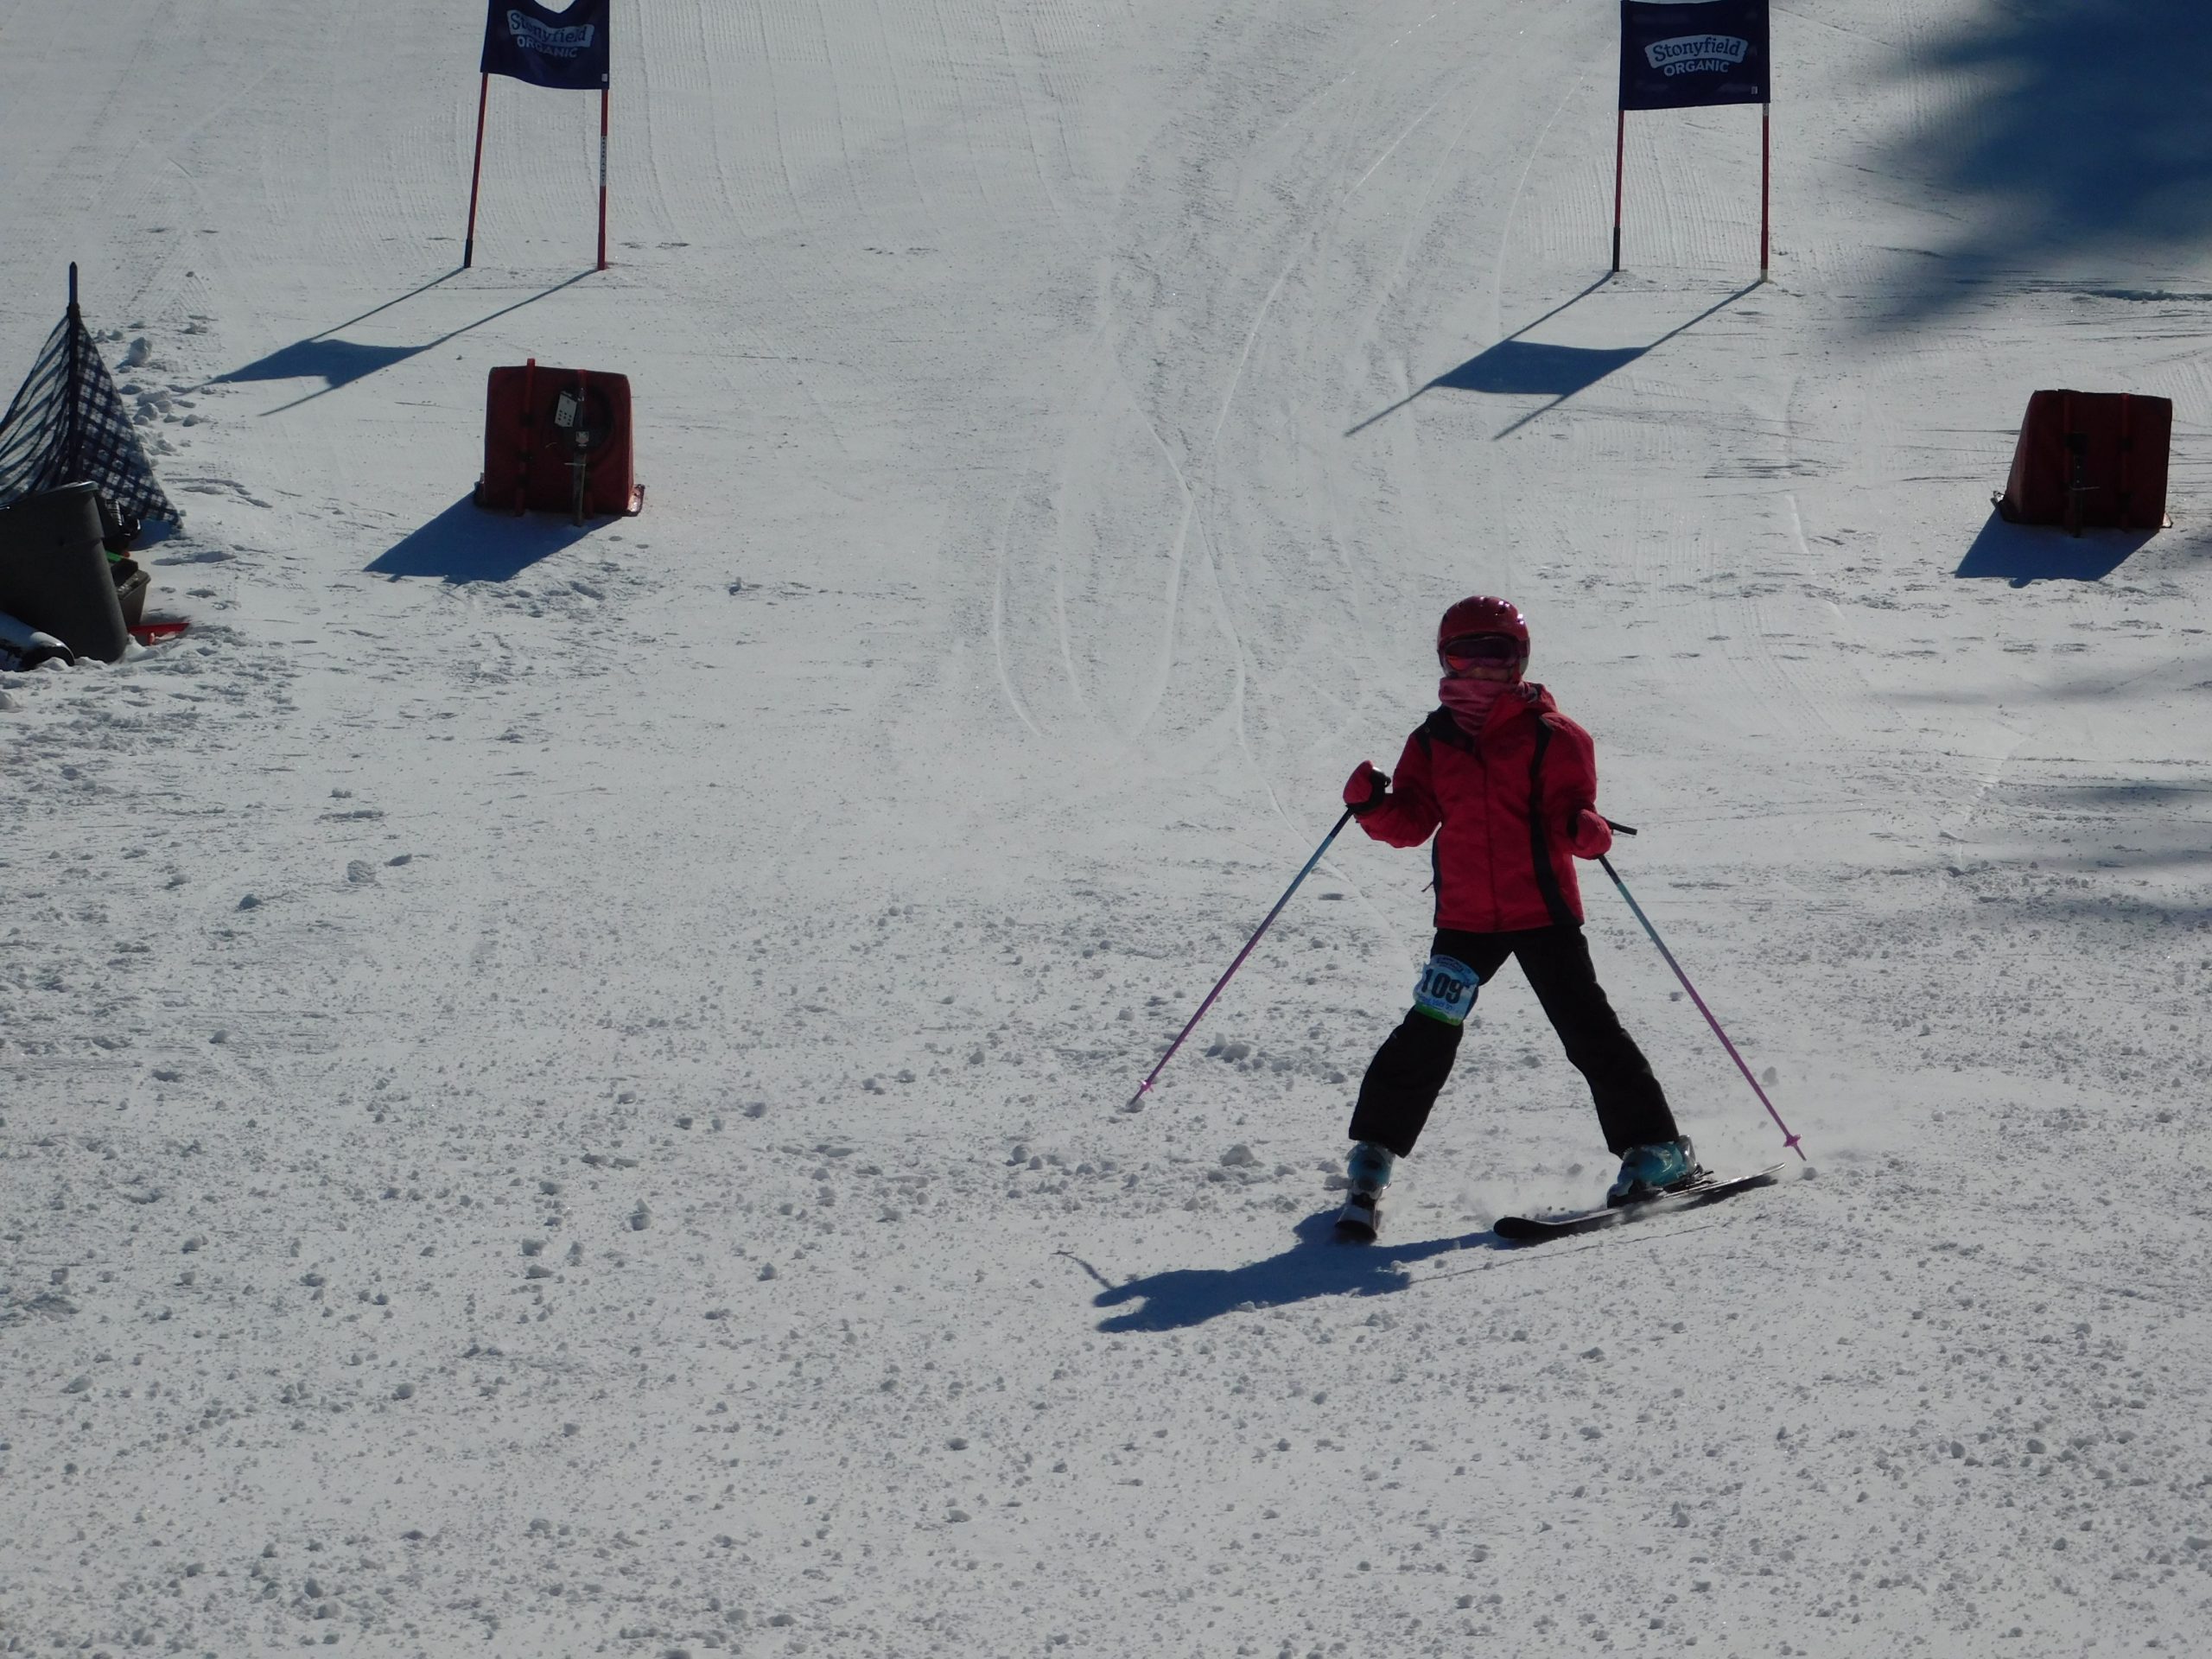 A beginner tries out key ski elements